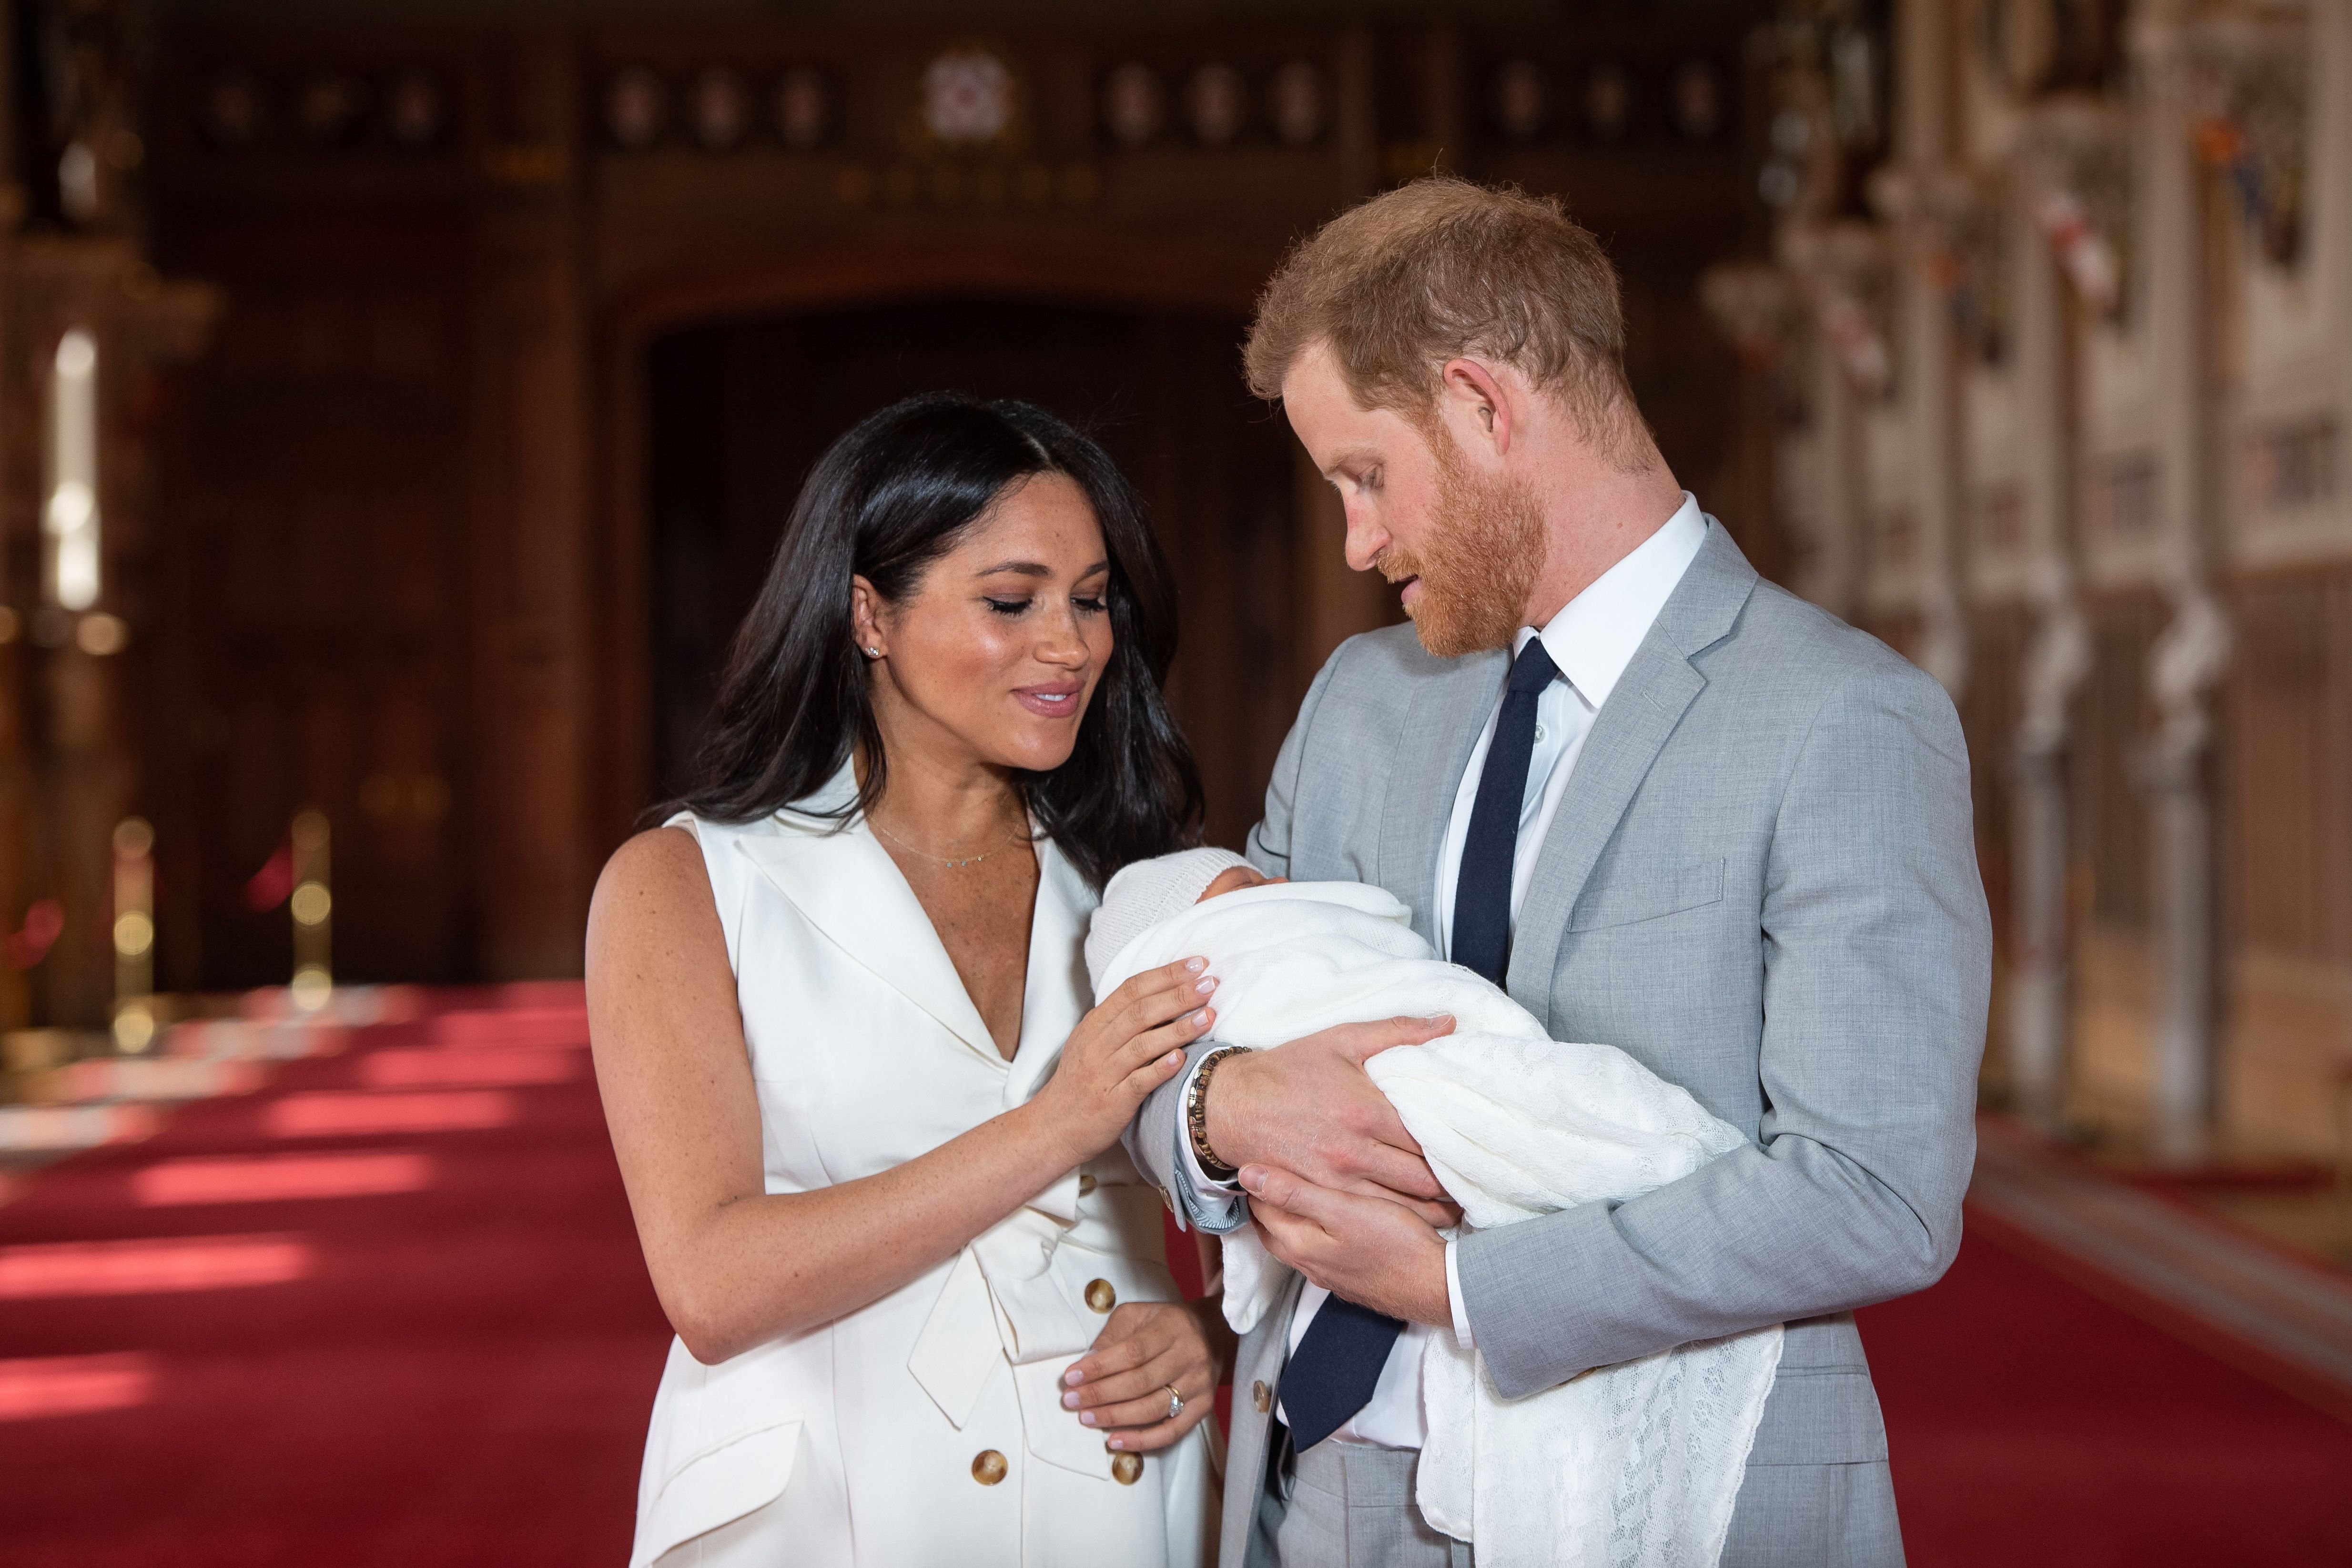 Prince Harry, Meghan Markle, and Archie Harrison Mountbatten-Windsor during a photocall in St George's Hall at Windsor Castle on May 8, 2019 in Windsor, England. | Source: Getty Images